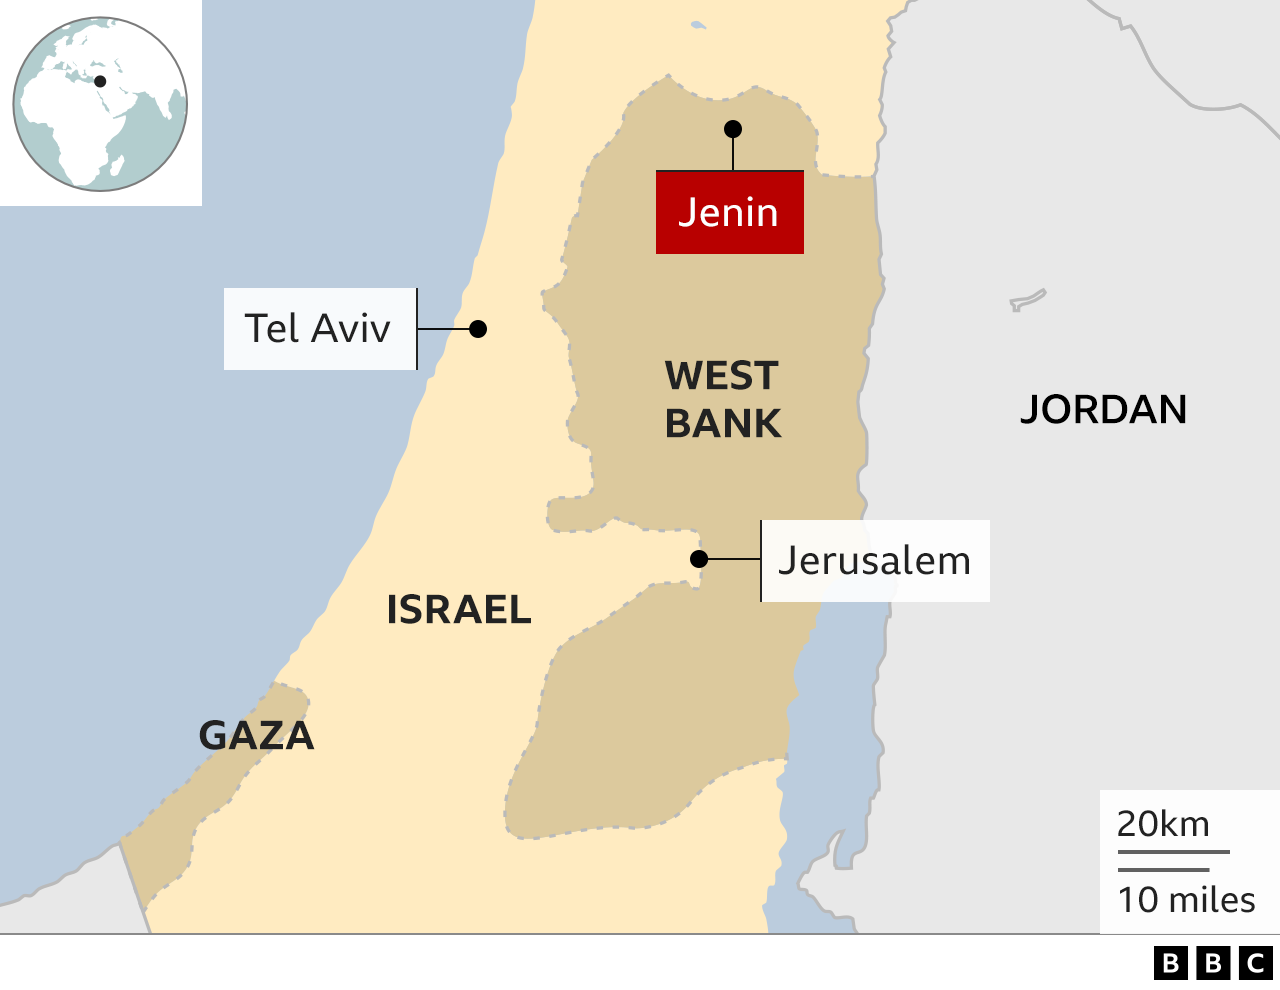 Map of Israel and the occupied West Bank, showing the location of Jenin